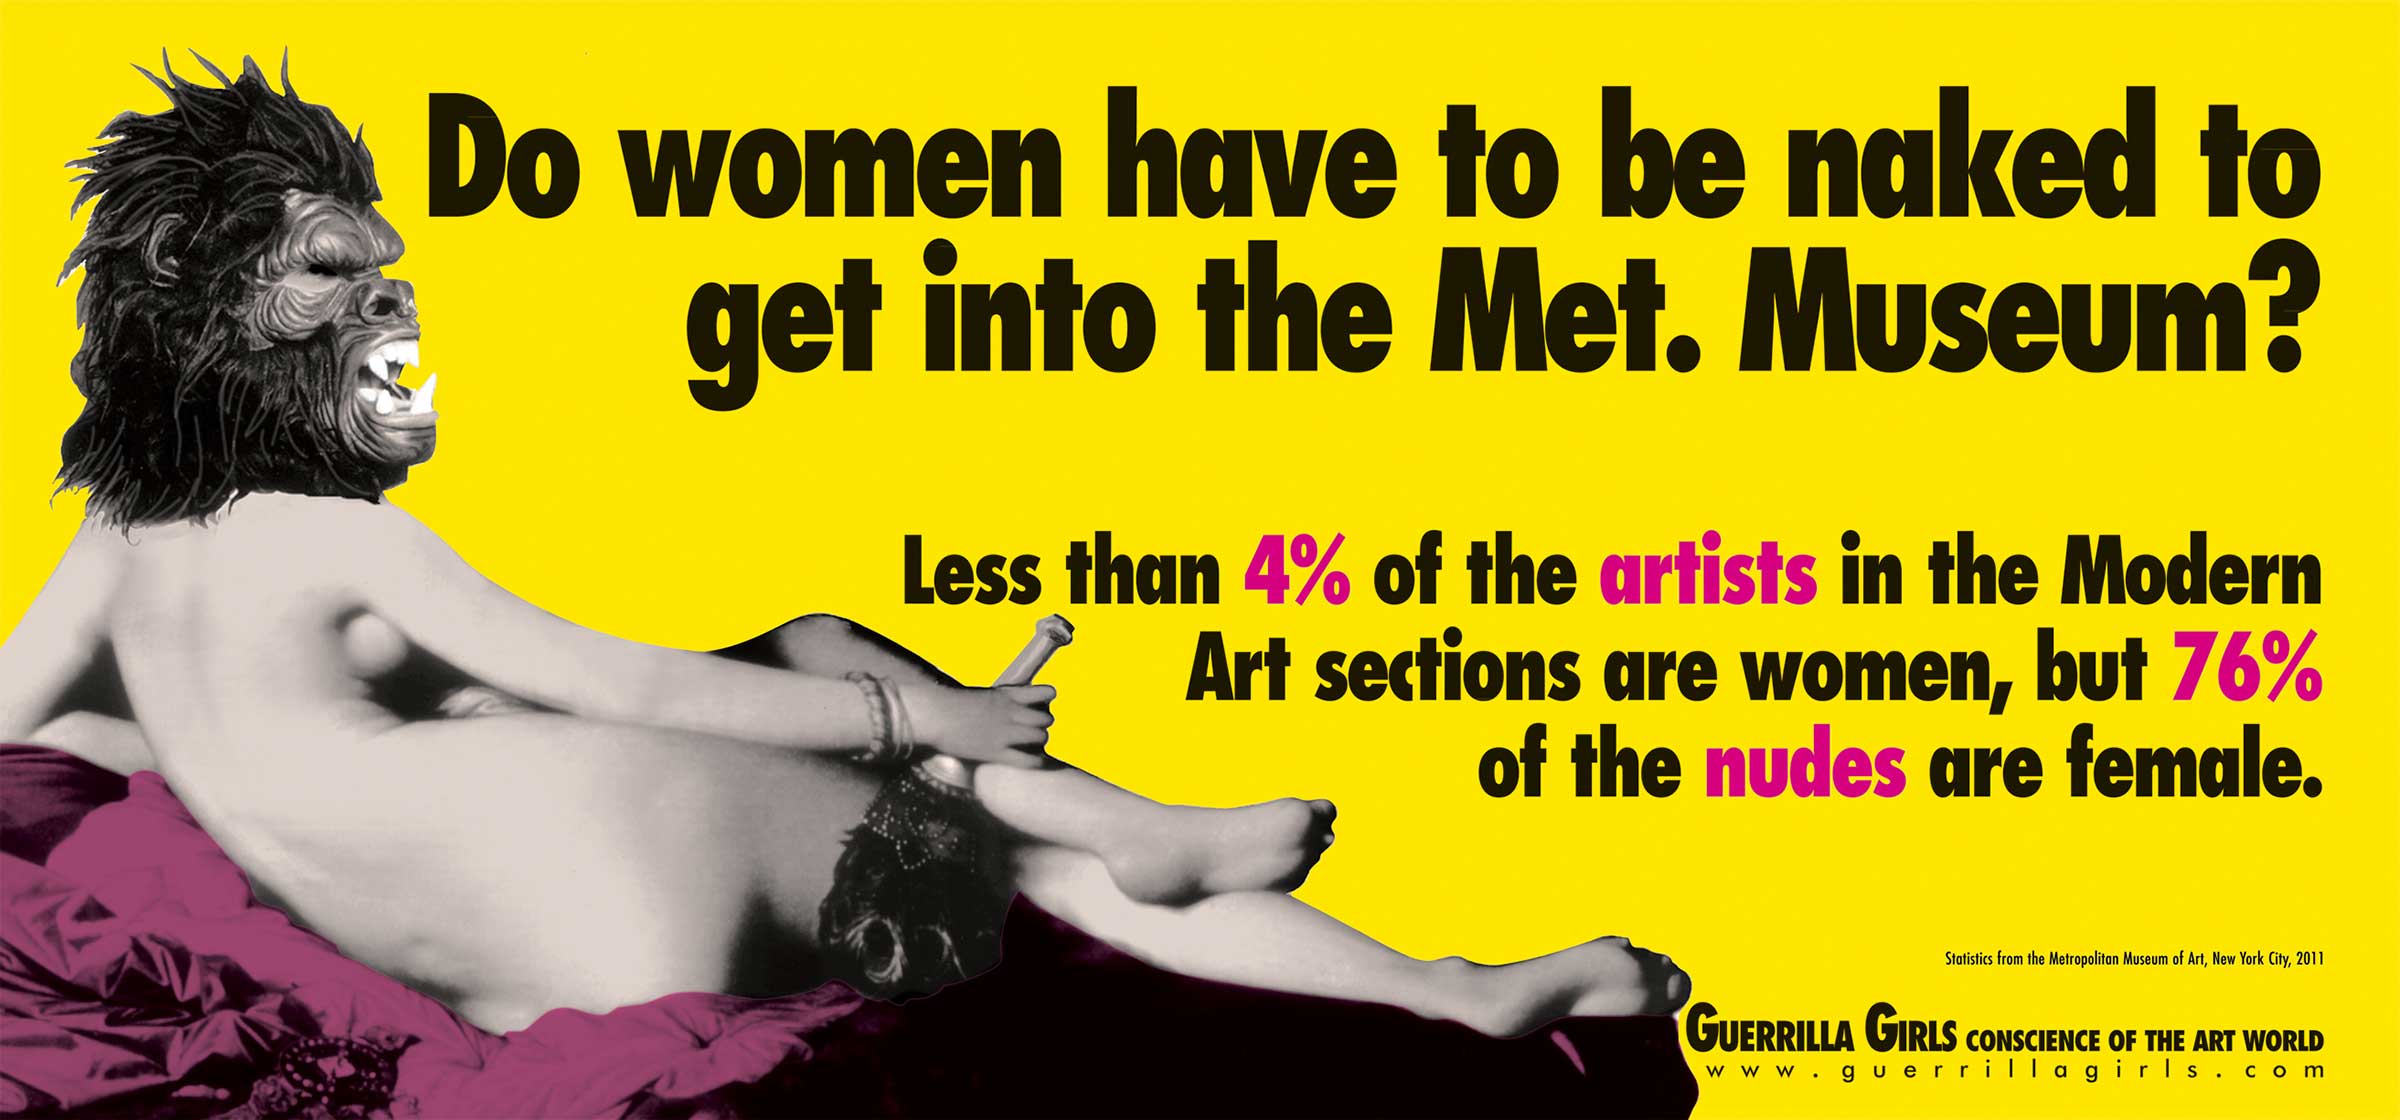 The Guerrilla Girls - Do Women Have To Be Naked To Get Into The Met Museum?, 2012